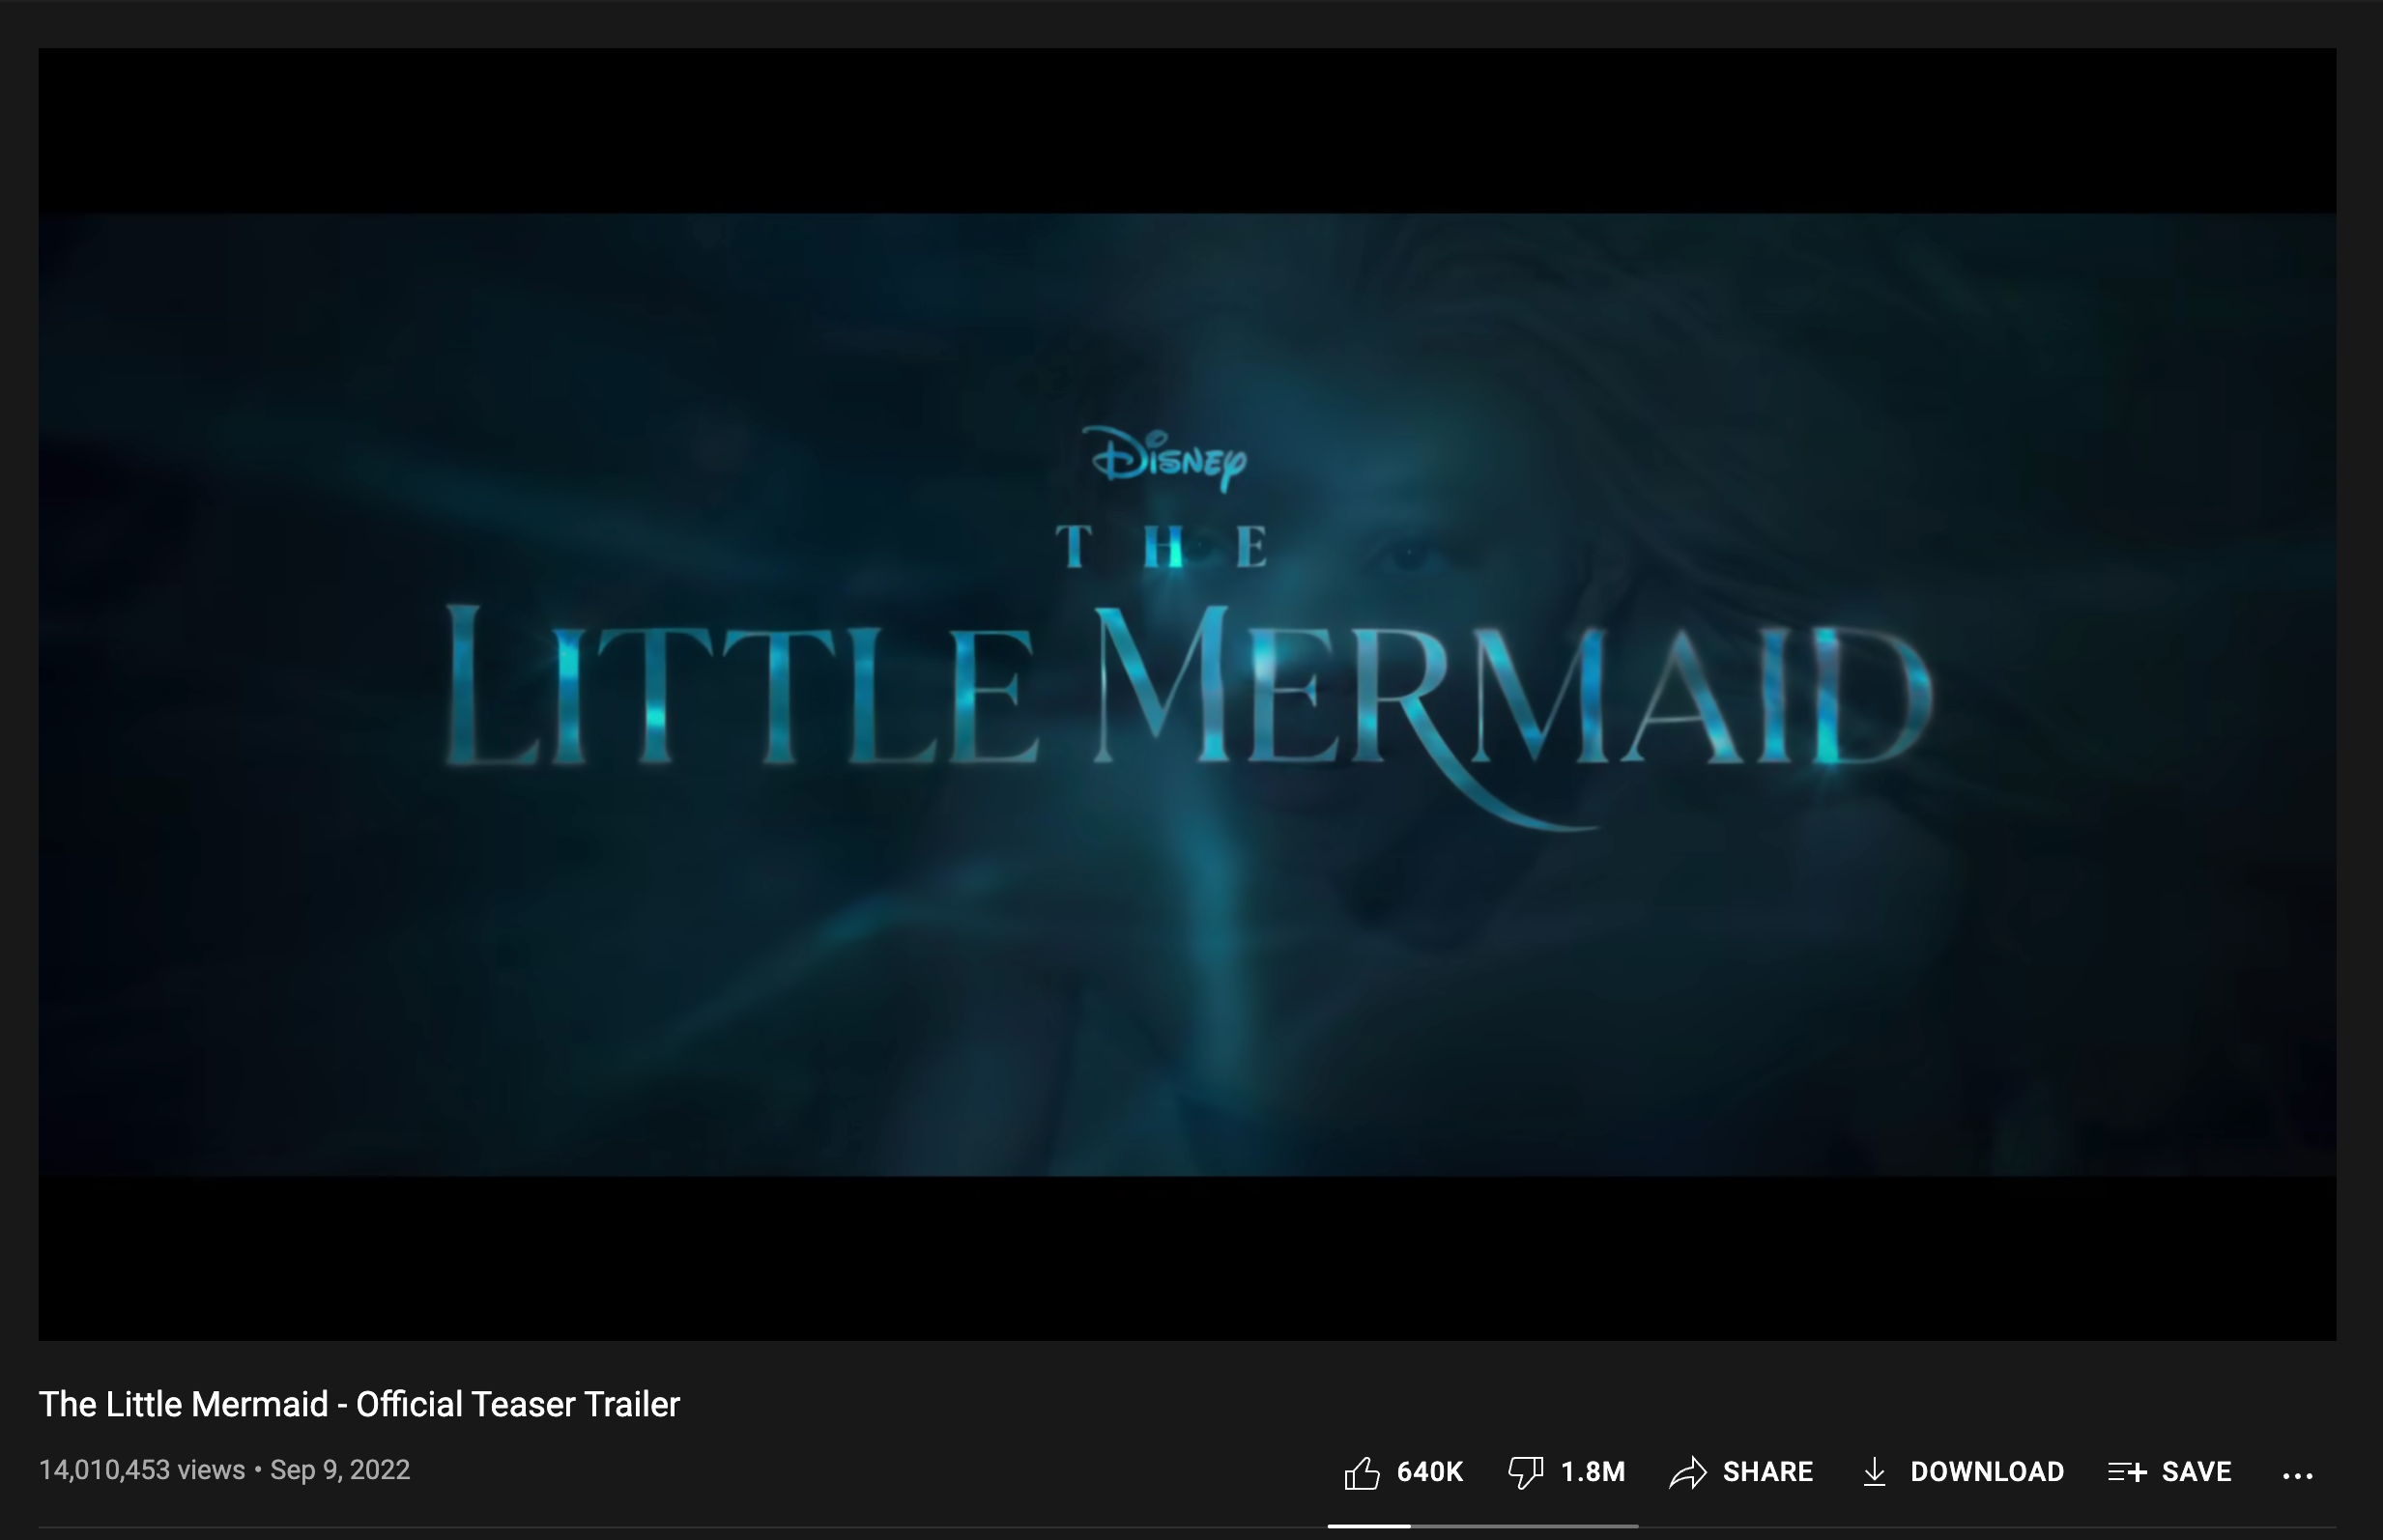 The Little Mermaid Teaser Trailer with an estimated 1.6M dislikes